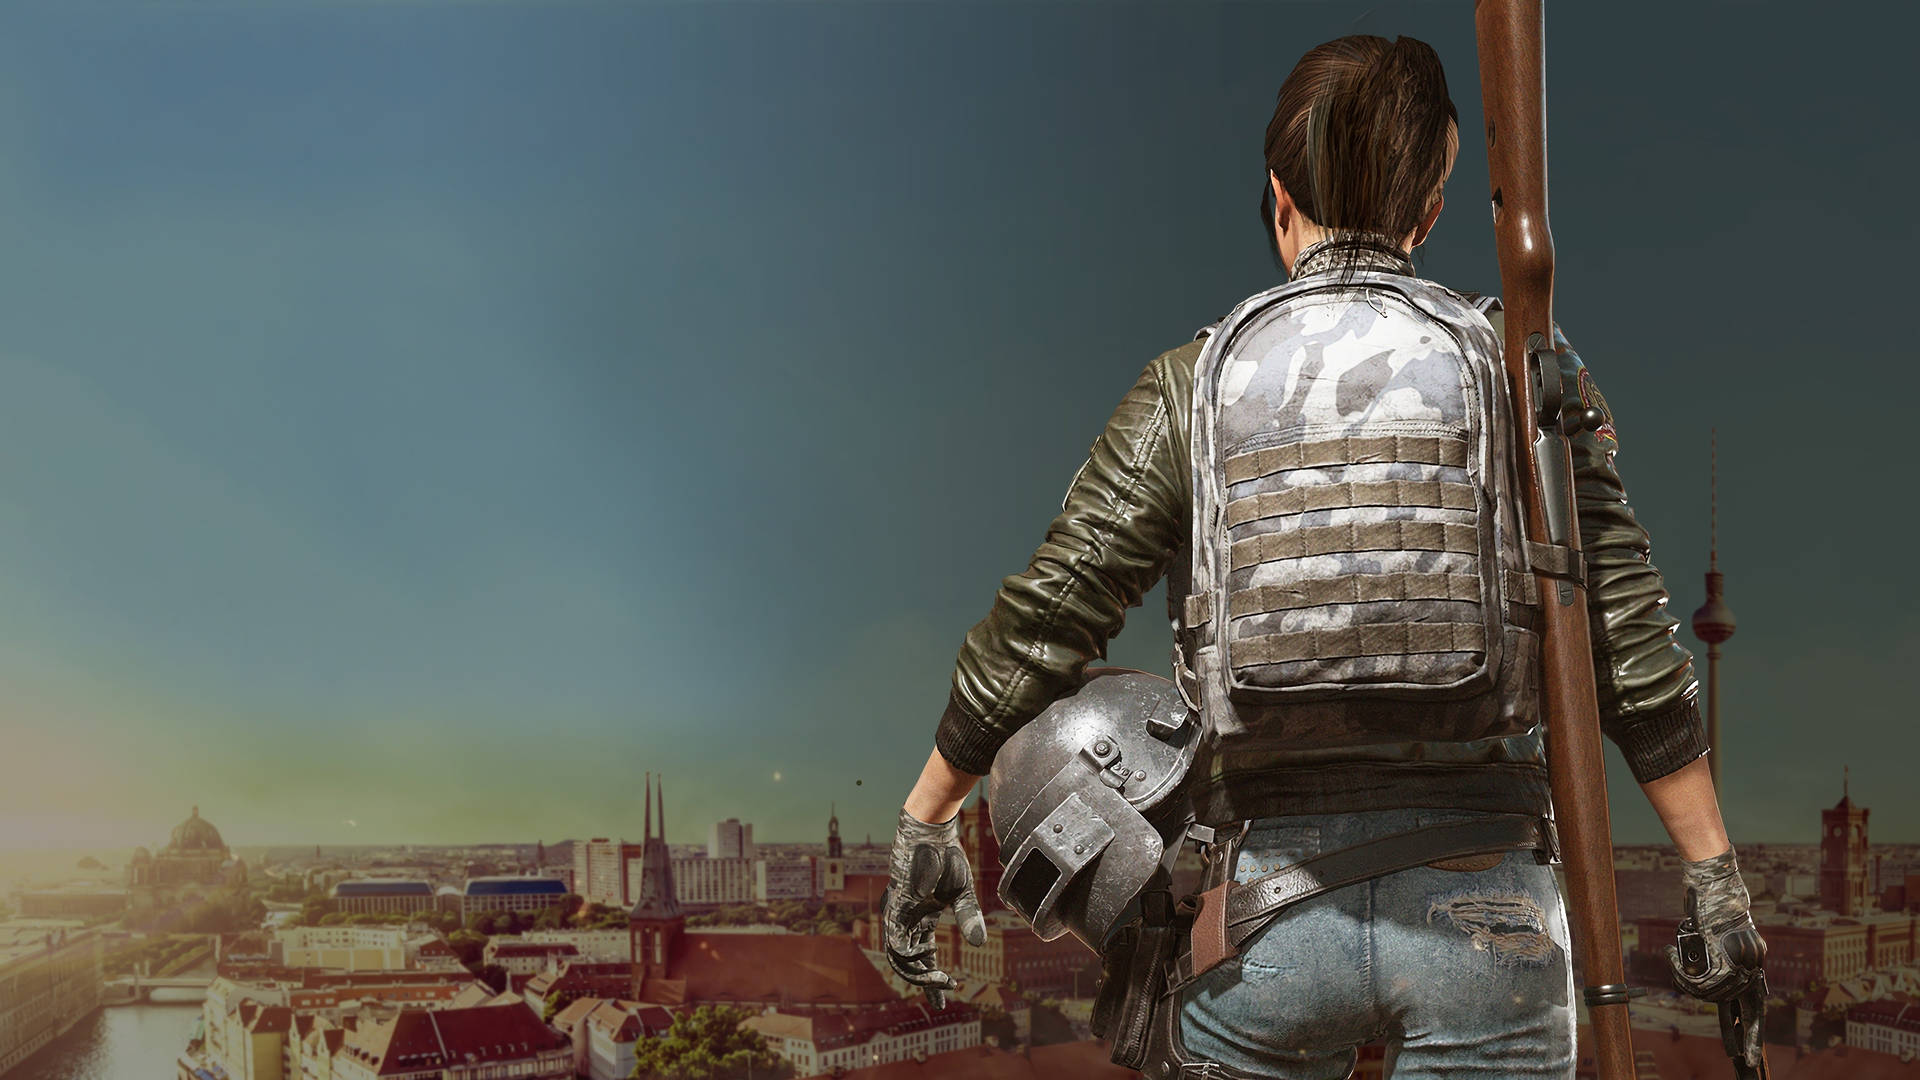 Playerunknown's Battlegrounds Armed Girl In City Wallpaper